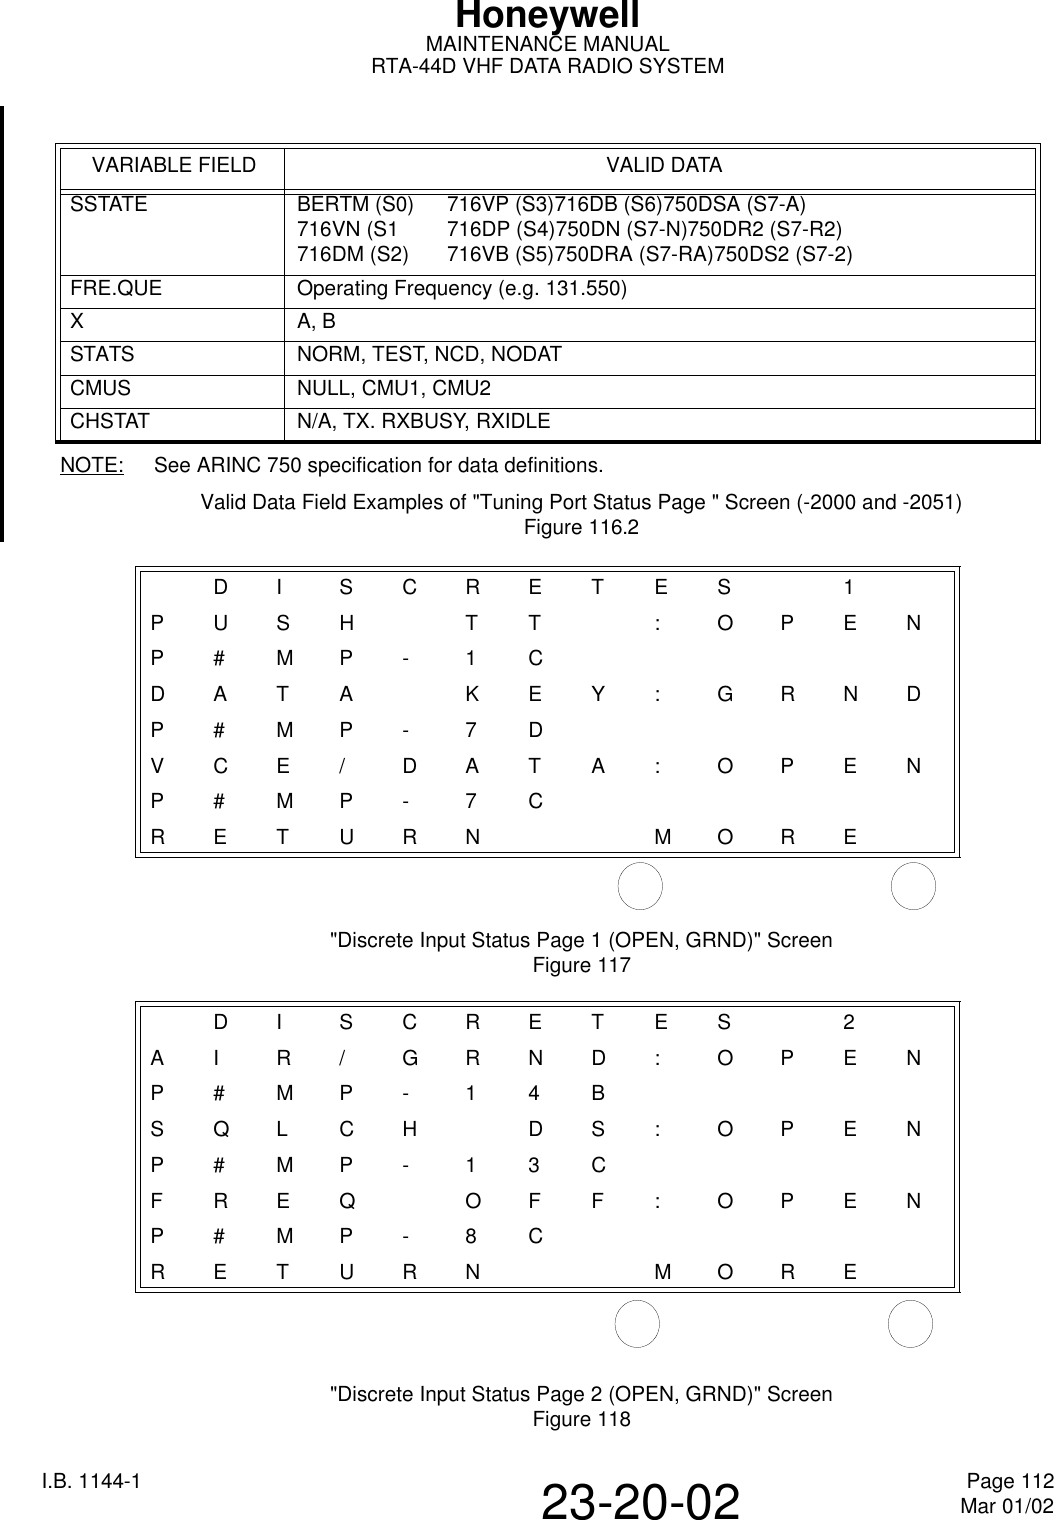 HoneywellMAINTENANCE MANUALRTA-44D VHF DATA RADIO SYSTEMI.B. 1144-1 Page 112Mar 01/0223-20-02NOTE: See ARINC 750 specification for data definitions.Valid Data Field Examples of &quot;Tuning Port Status Page &quot; Screen (-2000 and -2051)Figure 116.2&quot;Discrete Input Status Page 1 (OPEN, GRND)&quot; ScreenFigure 117&quot;Discrete Input Status Page 2 (OPEN, GRND)&quot; ScreenFigure 118VARIABLE FIELD VALID DATASSTATE BERTM (S0) 716VP (S3)716DB (S6)750DSA (S7-A)716VN (S1 716DP (S4)750DN (S7-N)750DR2 (S7-R2)716DM (S2) 716VB (S5)750DRA (S7-RA)750DS2 (S7-2)FRE.QUE Operating Frequency (e.g. 131.550)XA, BSTATS NORM, TEST, NCD, NODATCMUS NULL, CMU1, CMU2CHSTAT N/A, TX. RXBUSY, RXIDLEDISCRETE S 1PUSHT T :OPENP#MP-1CDATA KEY:GRNDP#MP-7DVCE/DATA:OPENP#MP-7CRETURN MOREDISCRETE S 2AIR/GRND:OPENP#MP-14BSQLCH DS:OPENP#MP-13CFREQ O FF:OPENP#MP-8CRETURN MORE